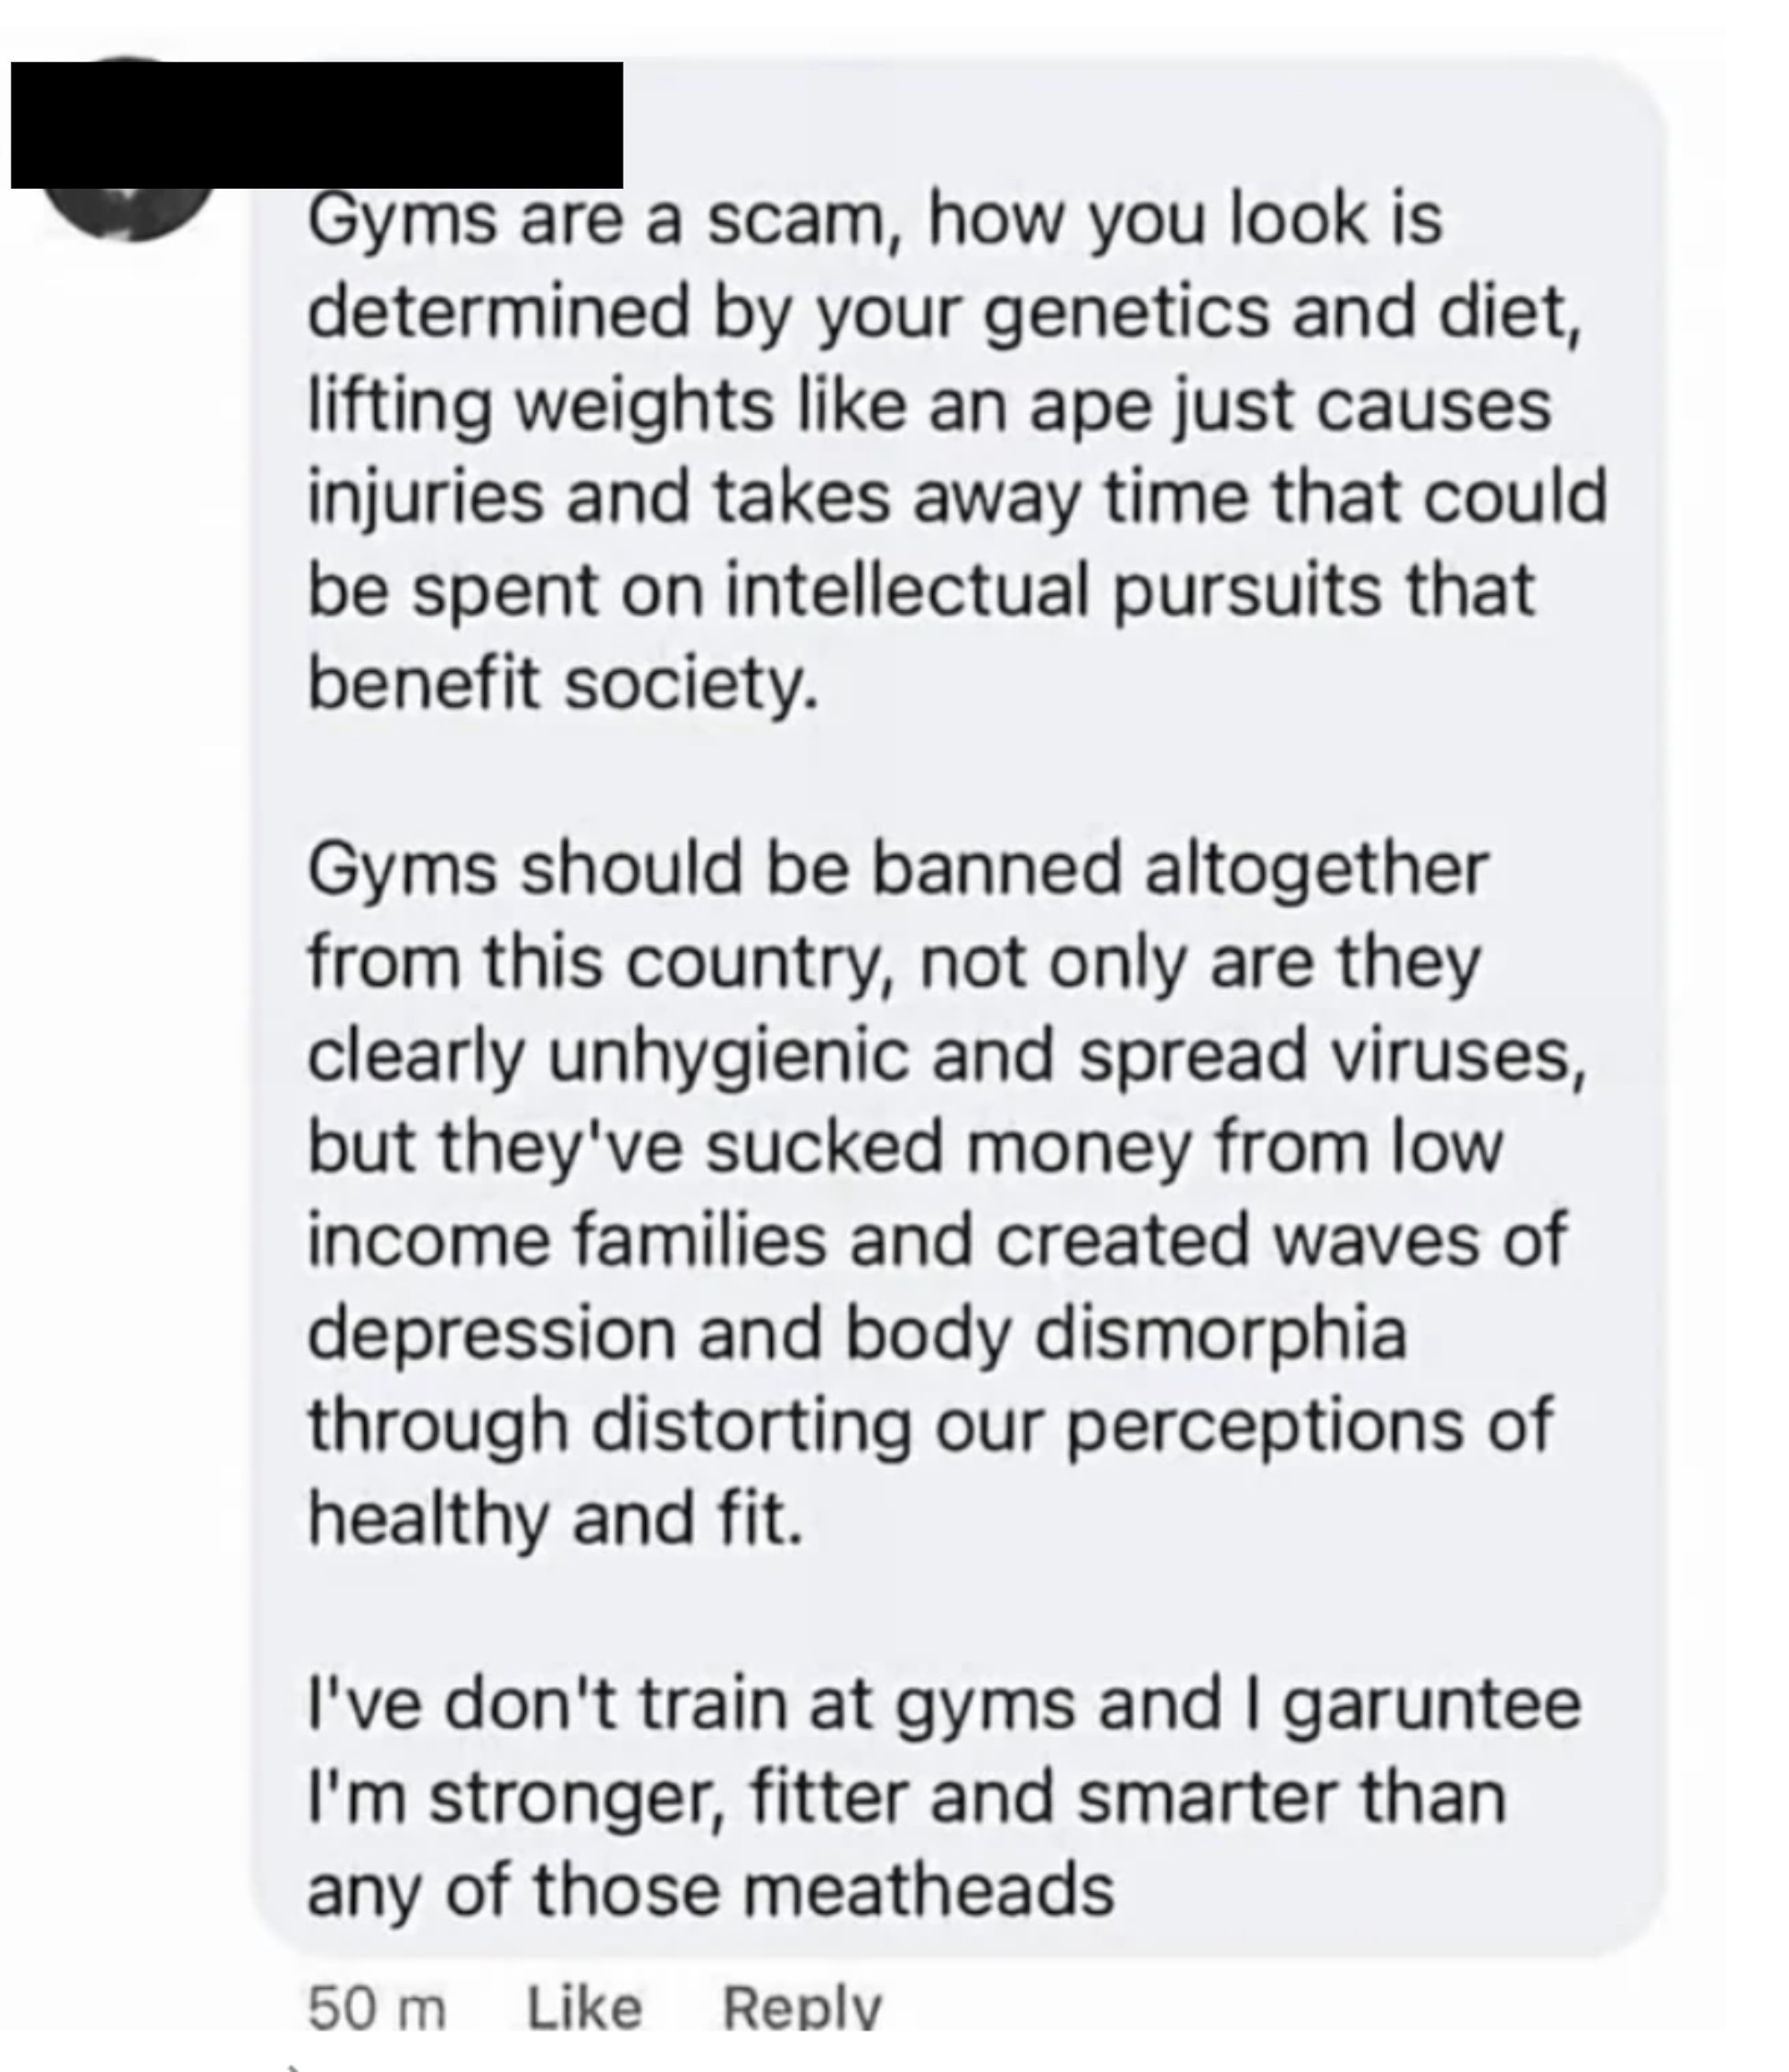 A social media post ending with, &quot;I don&#x27;t train at gyms and I garuntee I&#x27;m stronger, fitter and smarter than any of those meatheads.&quot;